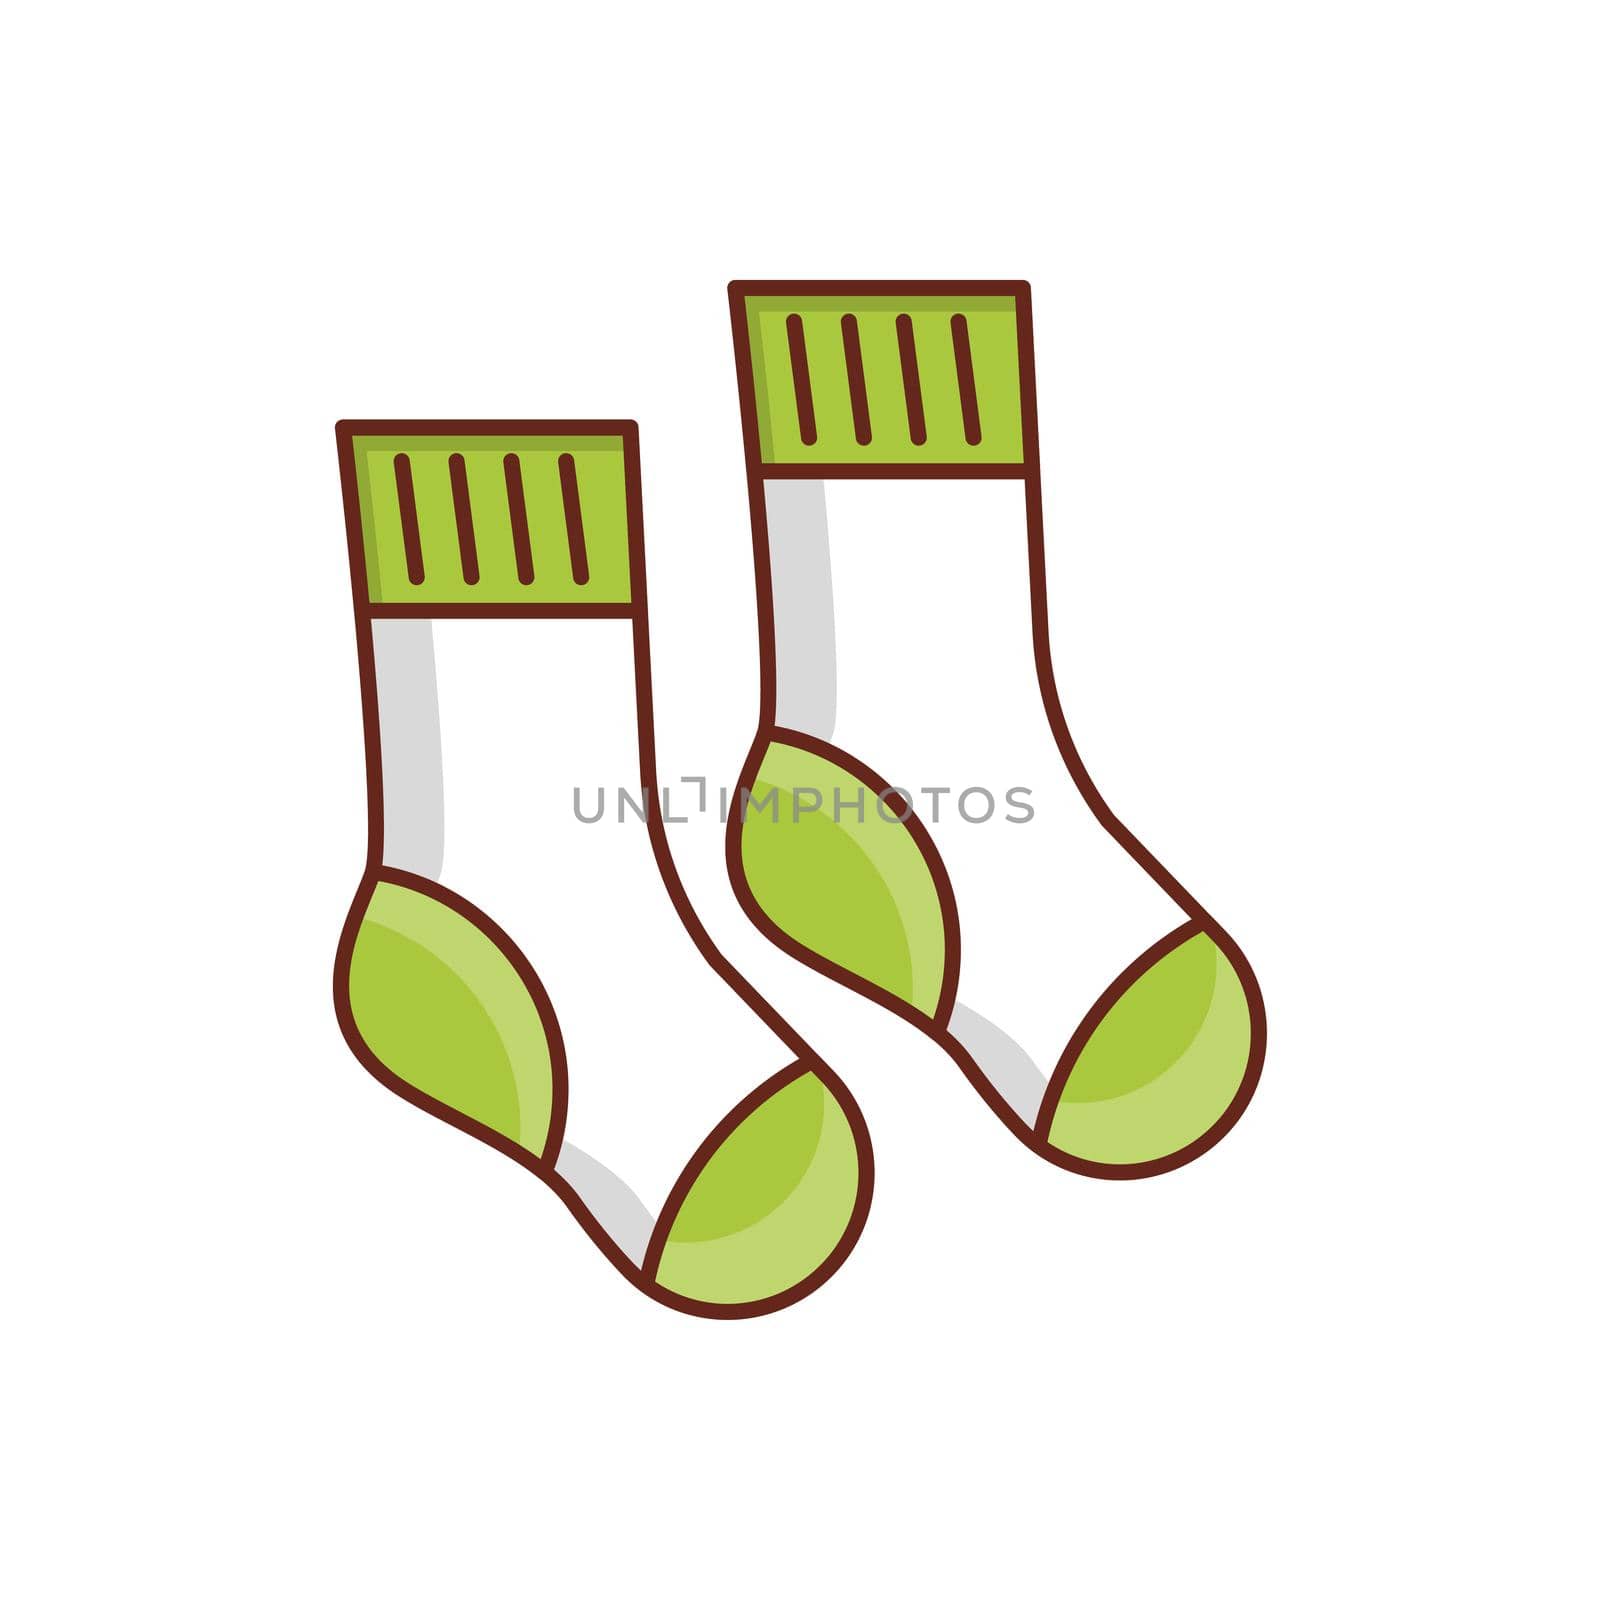 socks Vector illustration on a transparent background. Premium quality symbols.Vector line flat color icon for concept and graphic design.